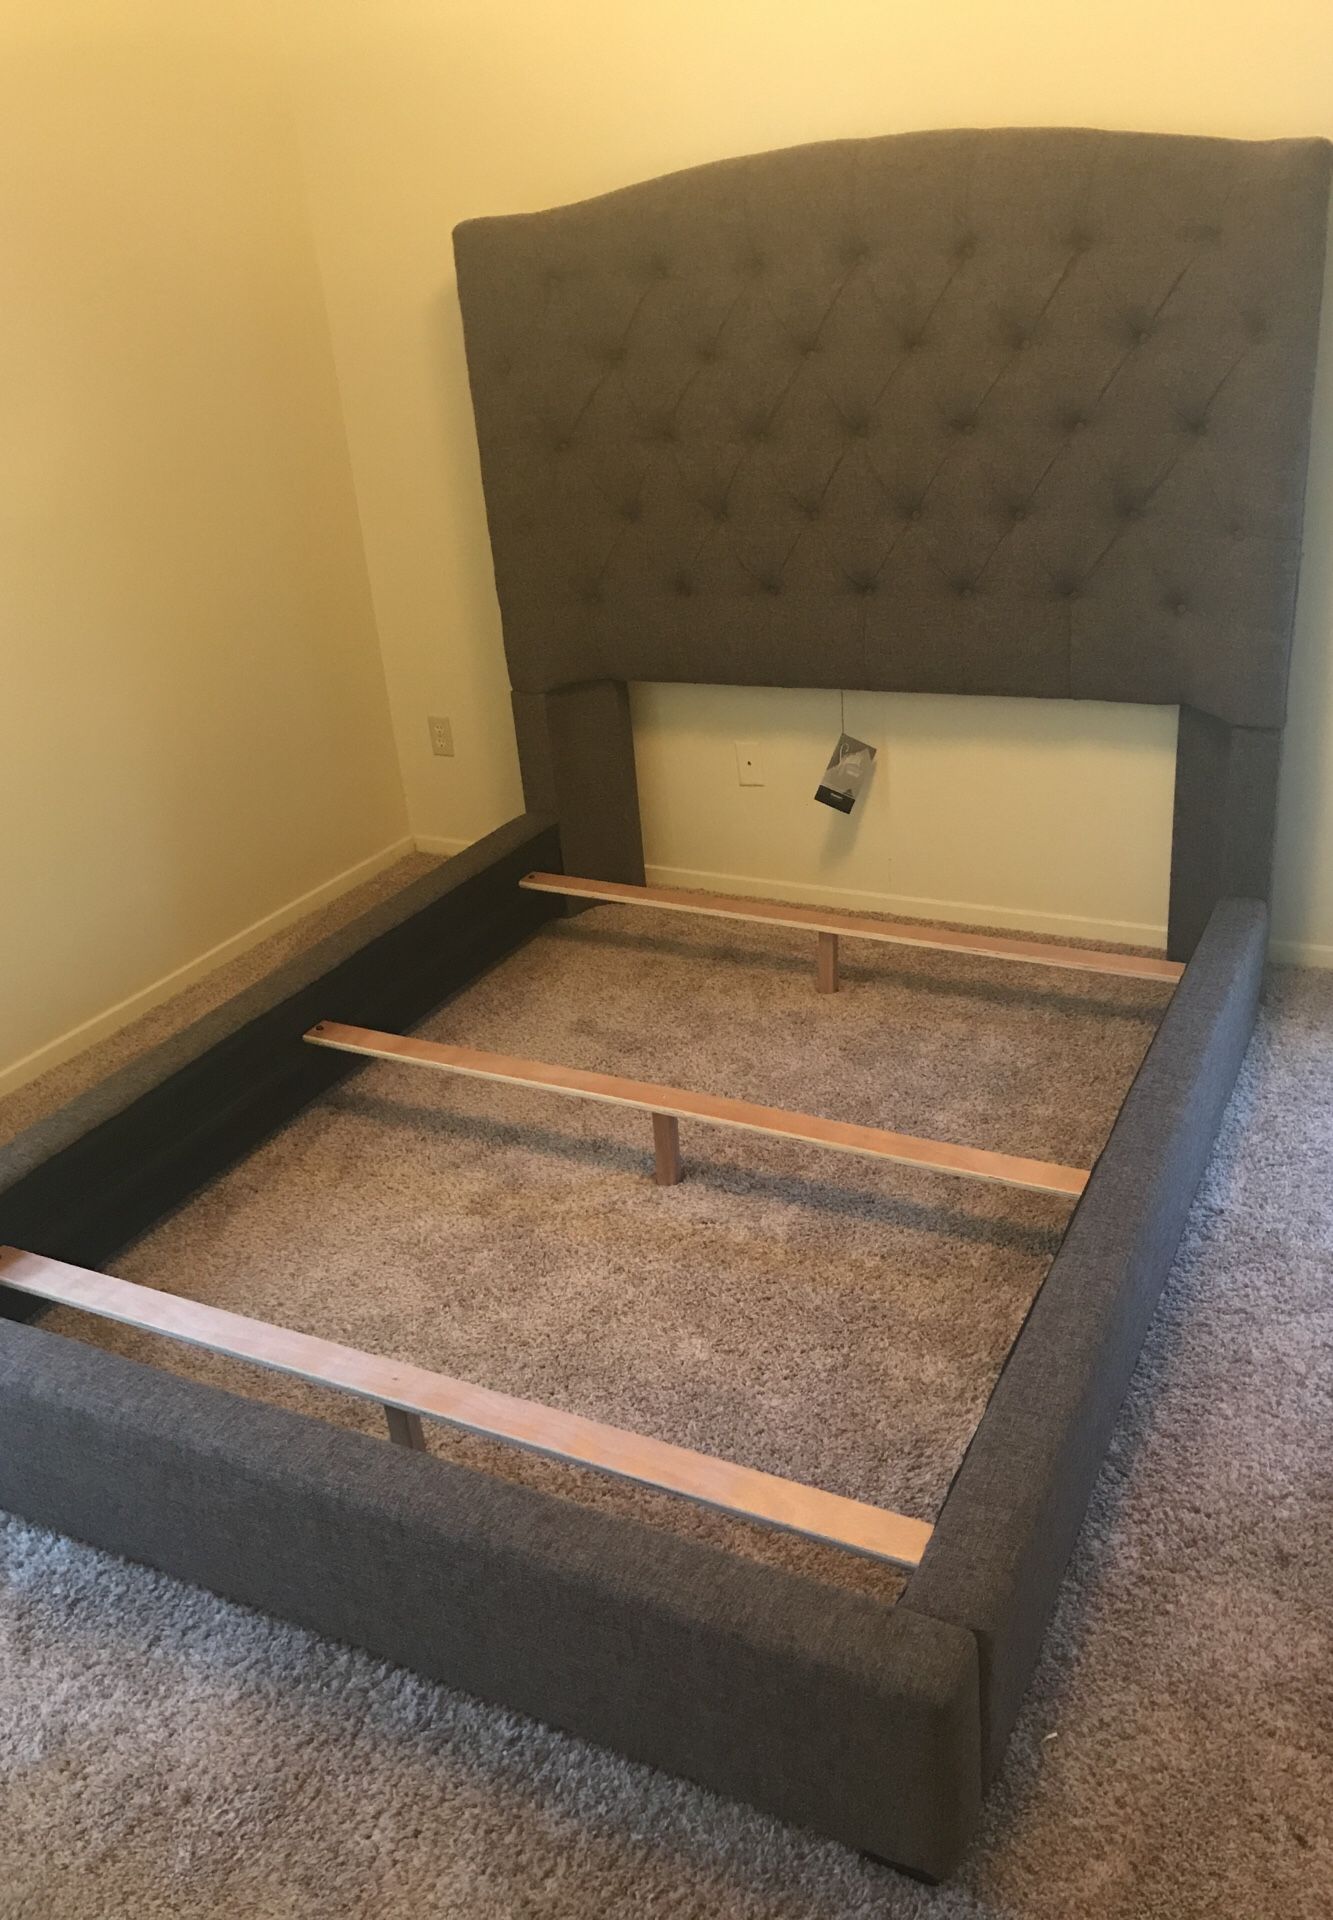 Up hostler..brand new bed frame with tag still on there OBO